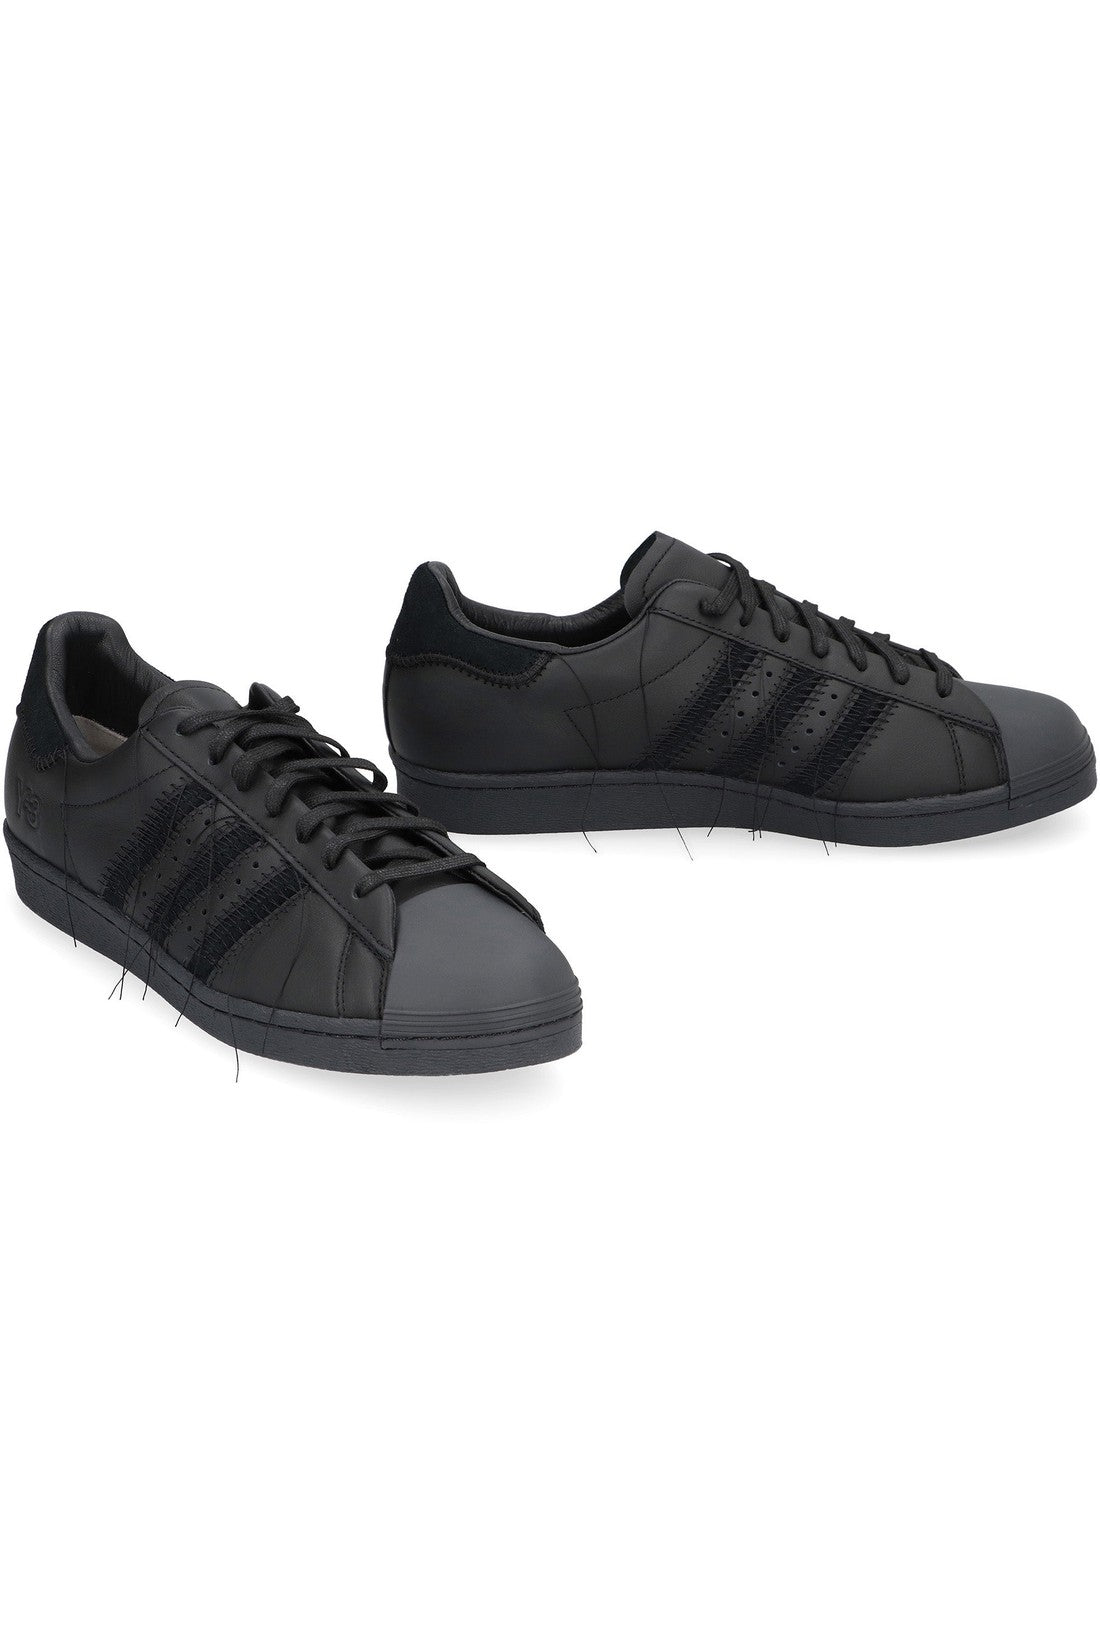 adidas Y-3-OUTLET-SALE-Superstar leather low-top sneakers-ARCHIVIST